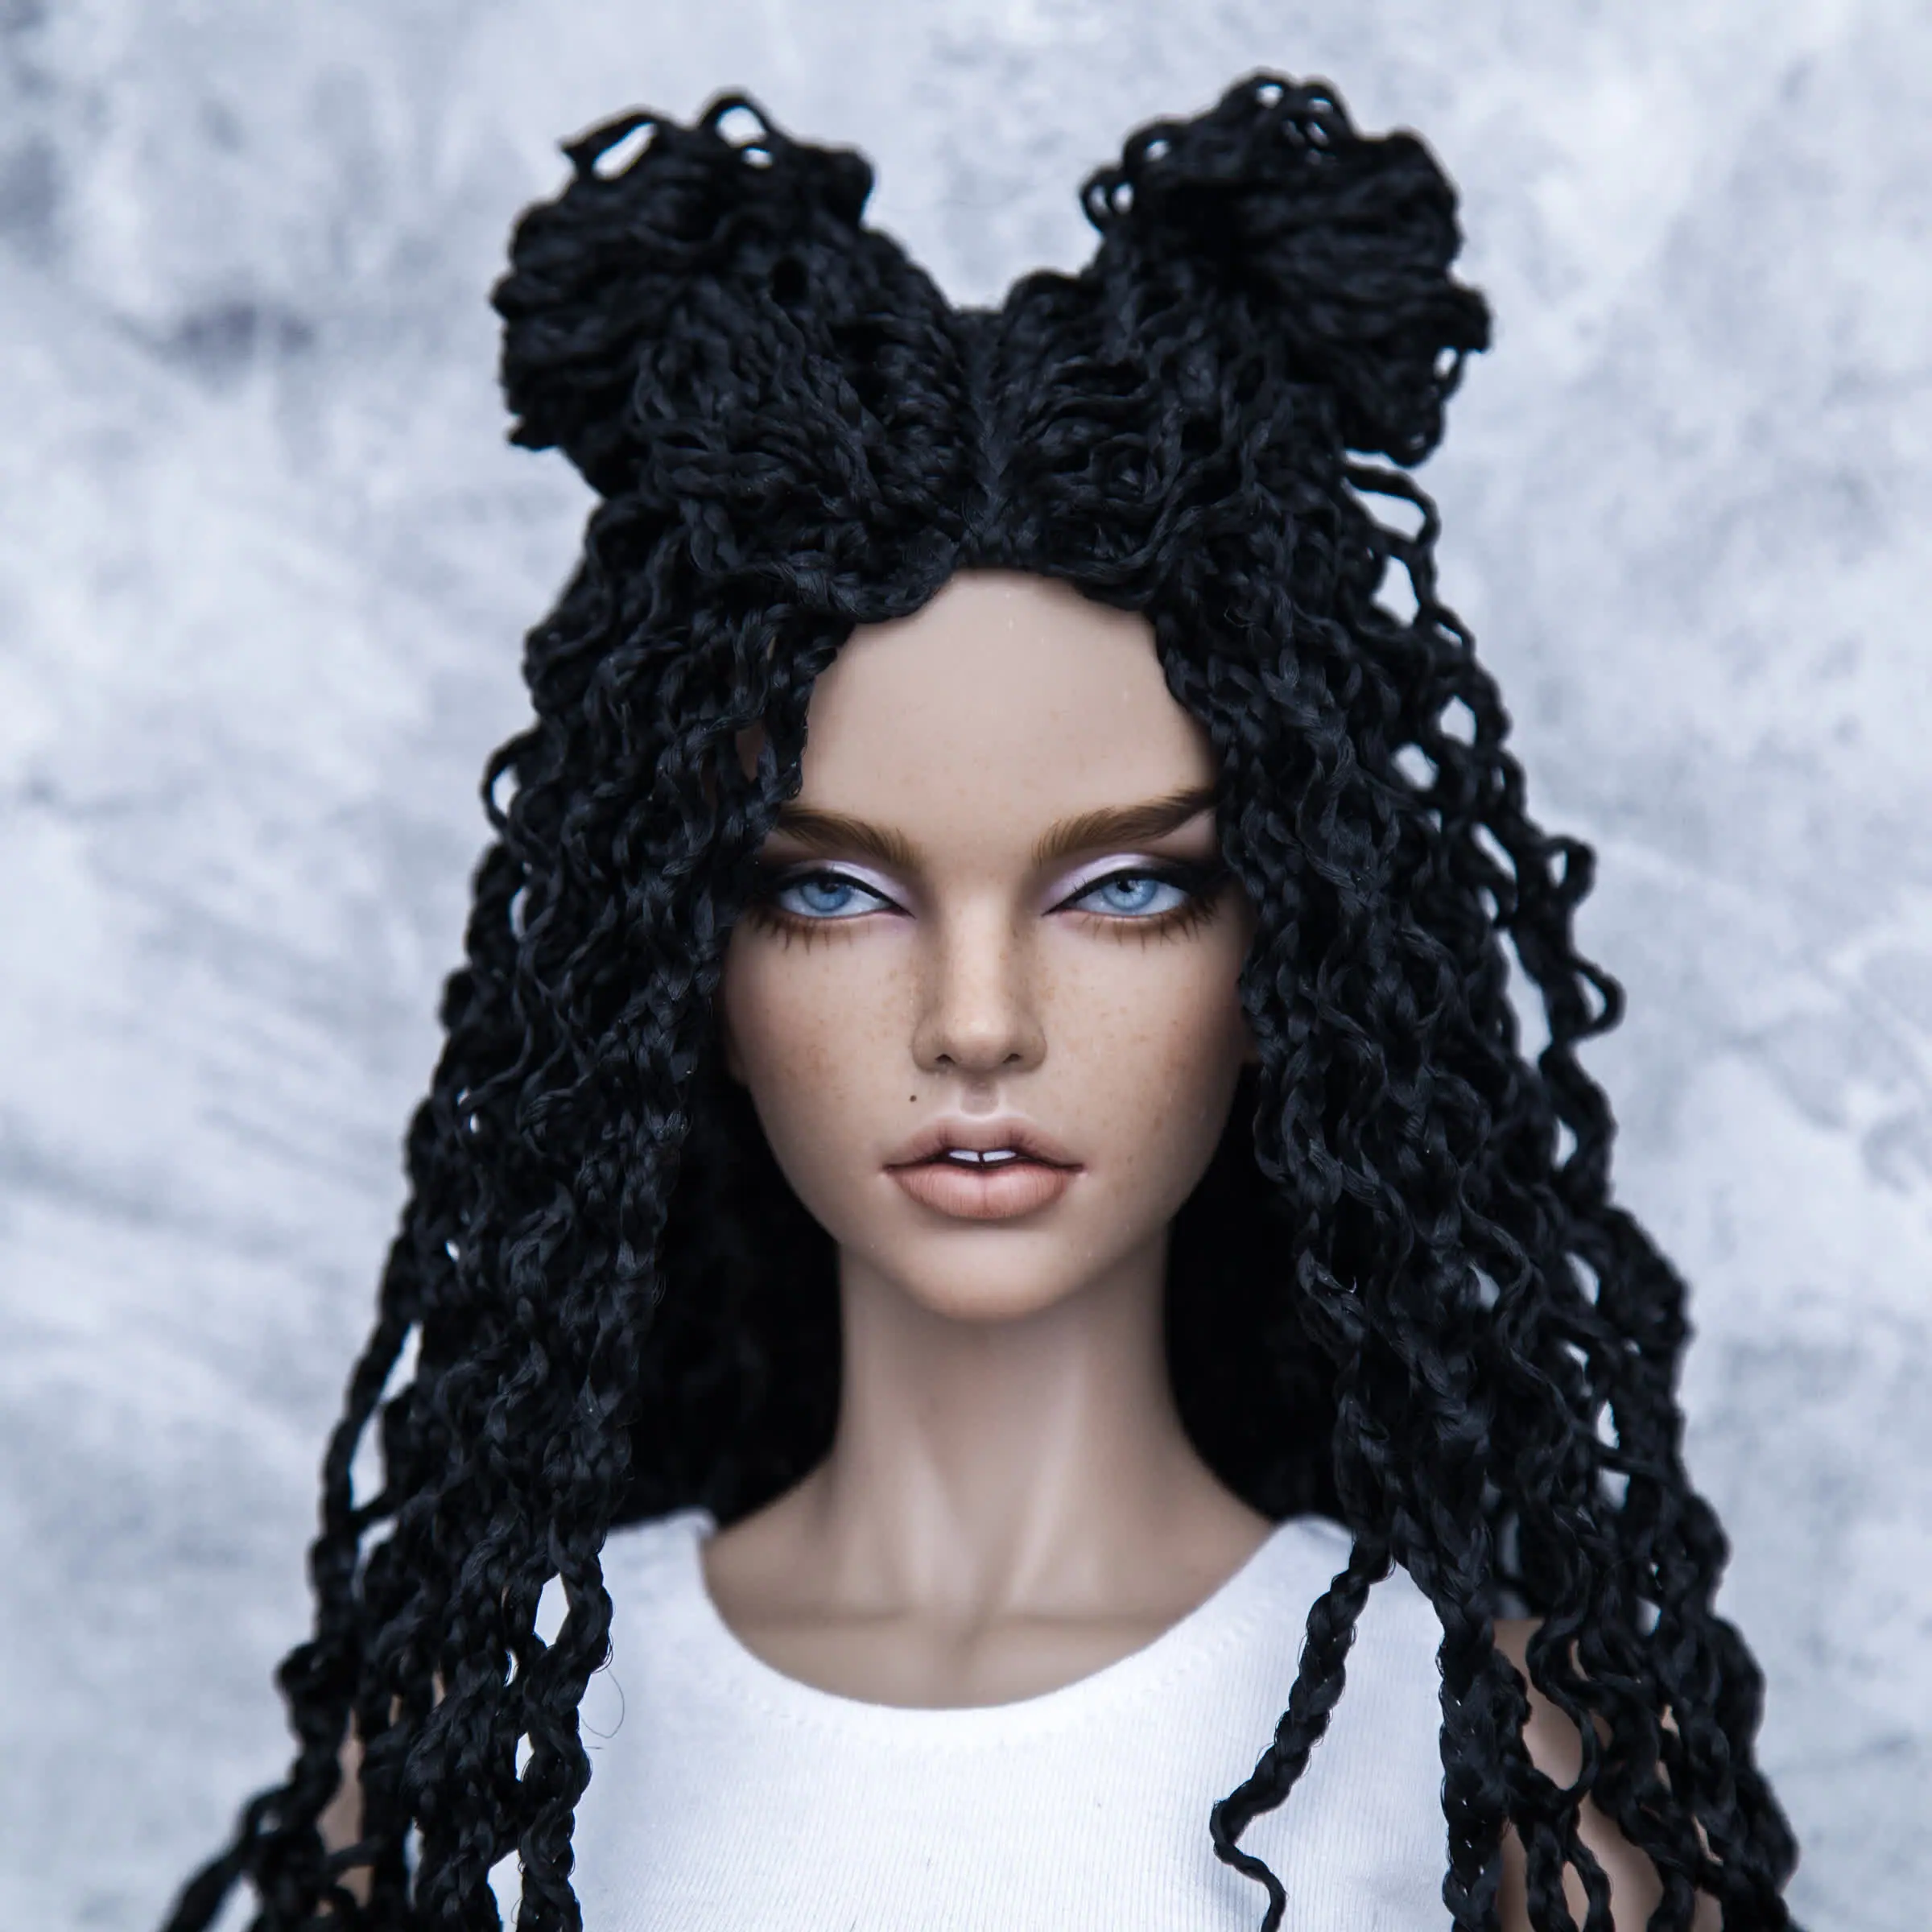 Tnfeeon Toy Doll Head Wig, Girls Gift Heat Resistant Long Curly Braids Hair  Replacement Wigs for DIY Simulation Doll Modeling (Black)